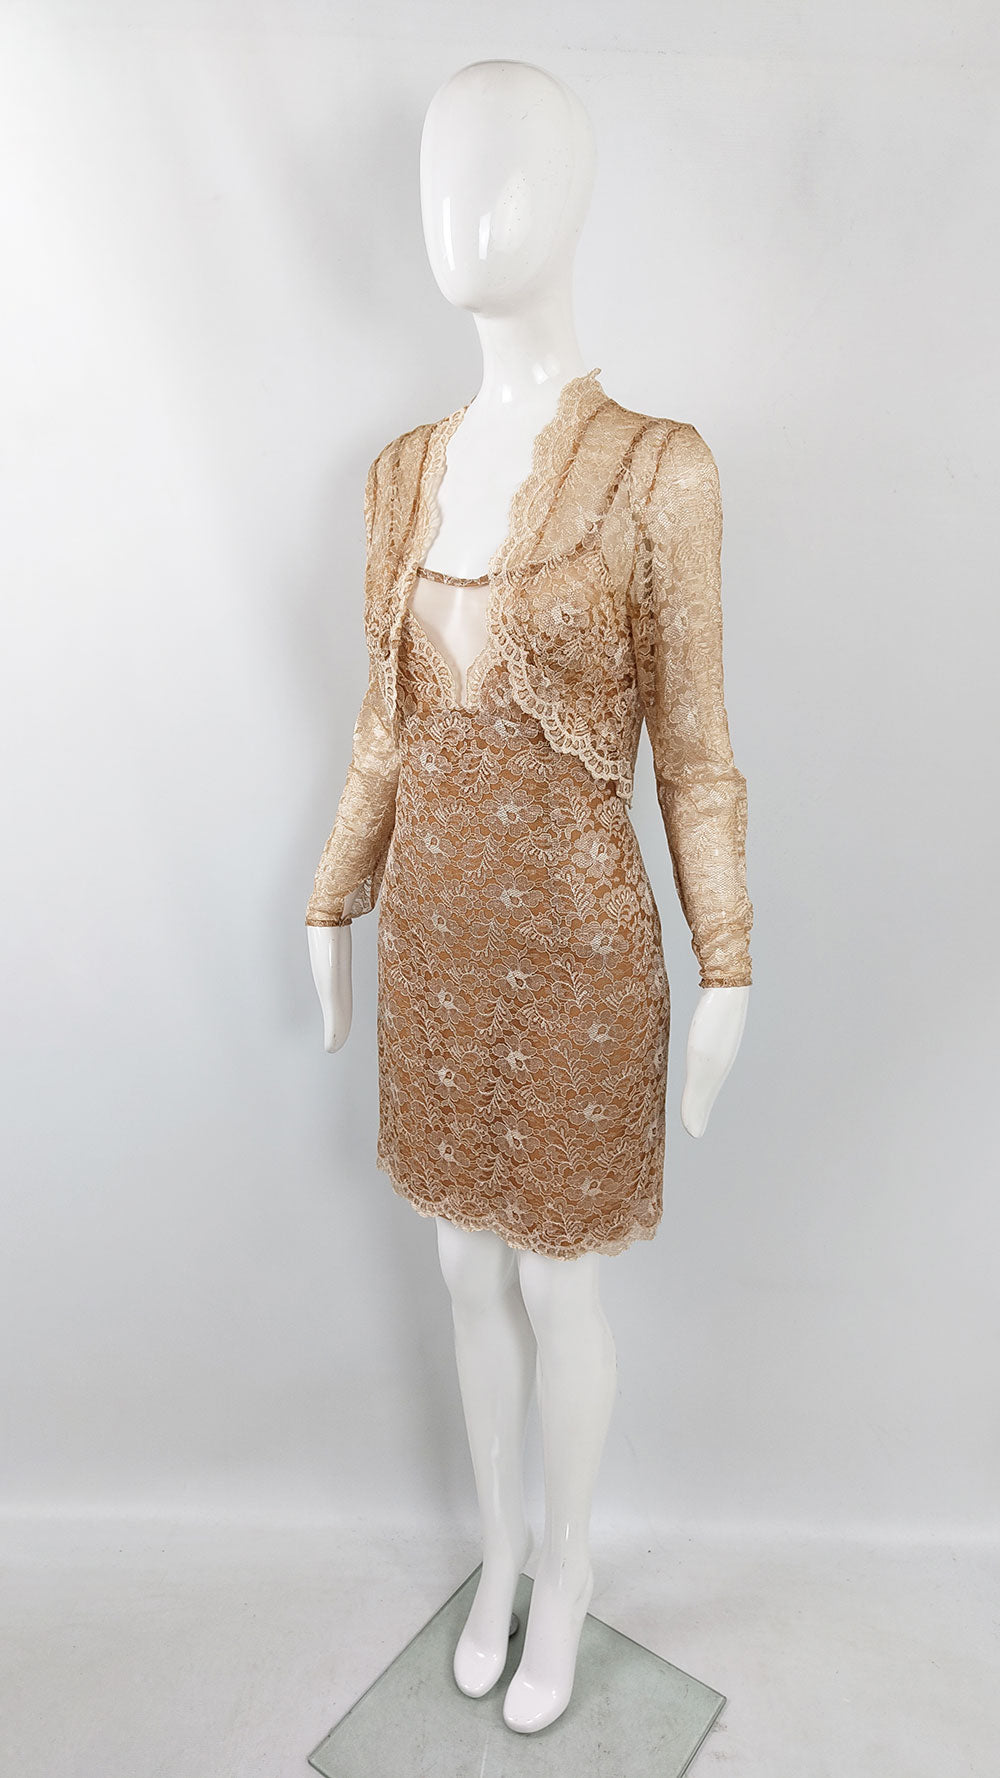 A vintage cocktail dress and shrug ensemble in a tan lace with a matching sheer jacket.